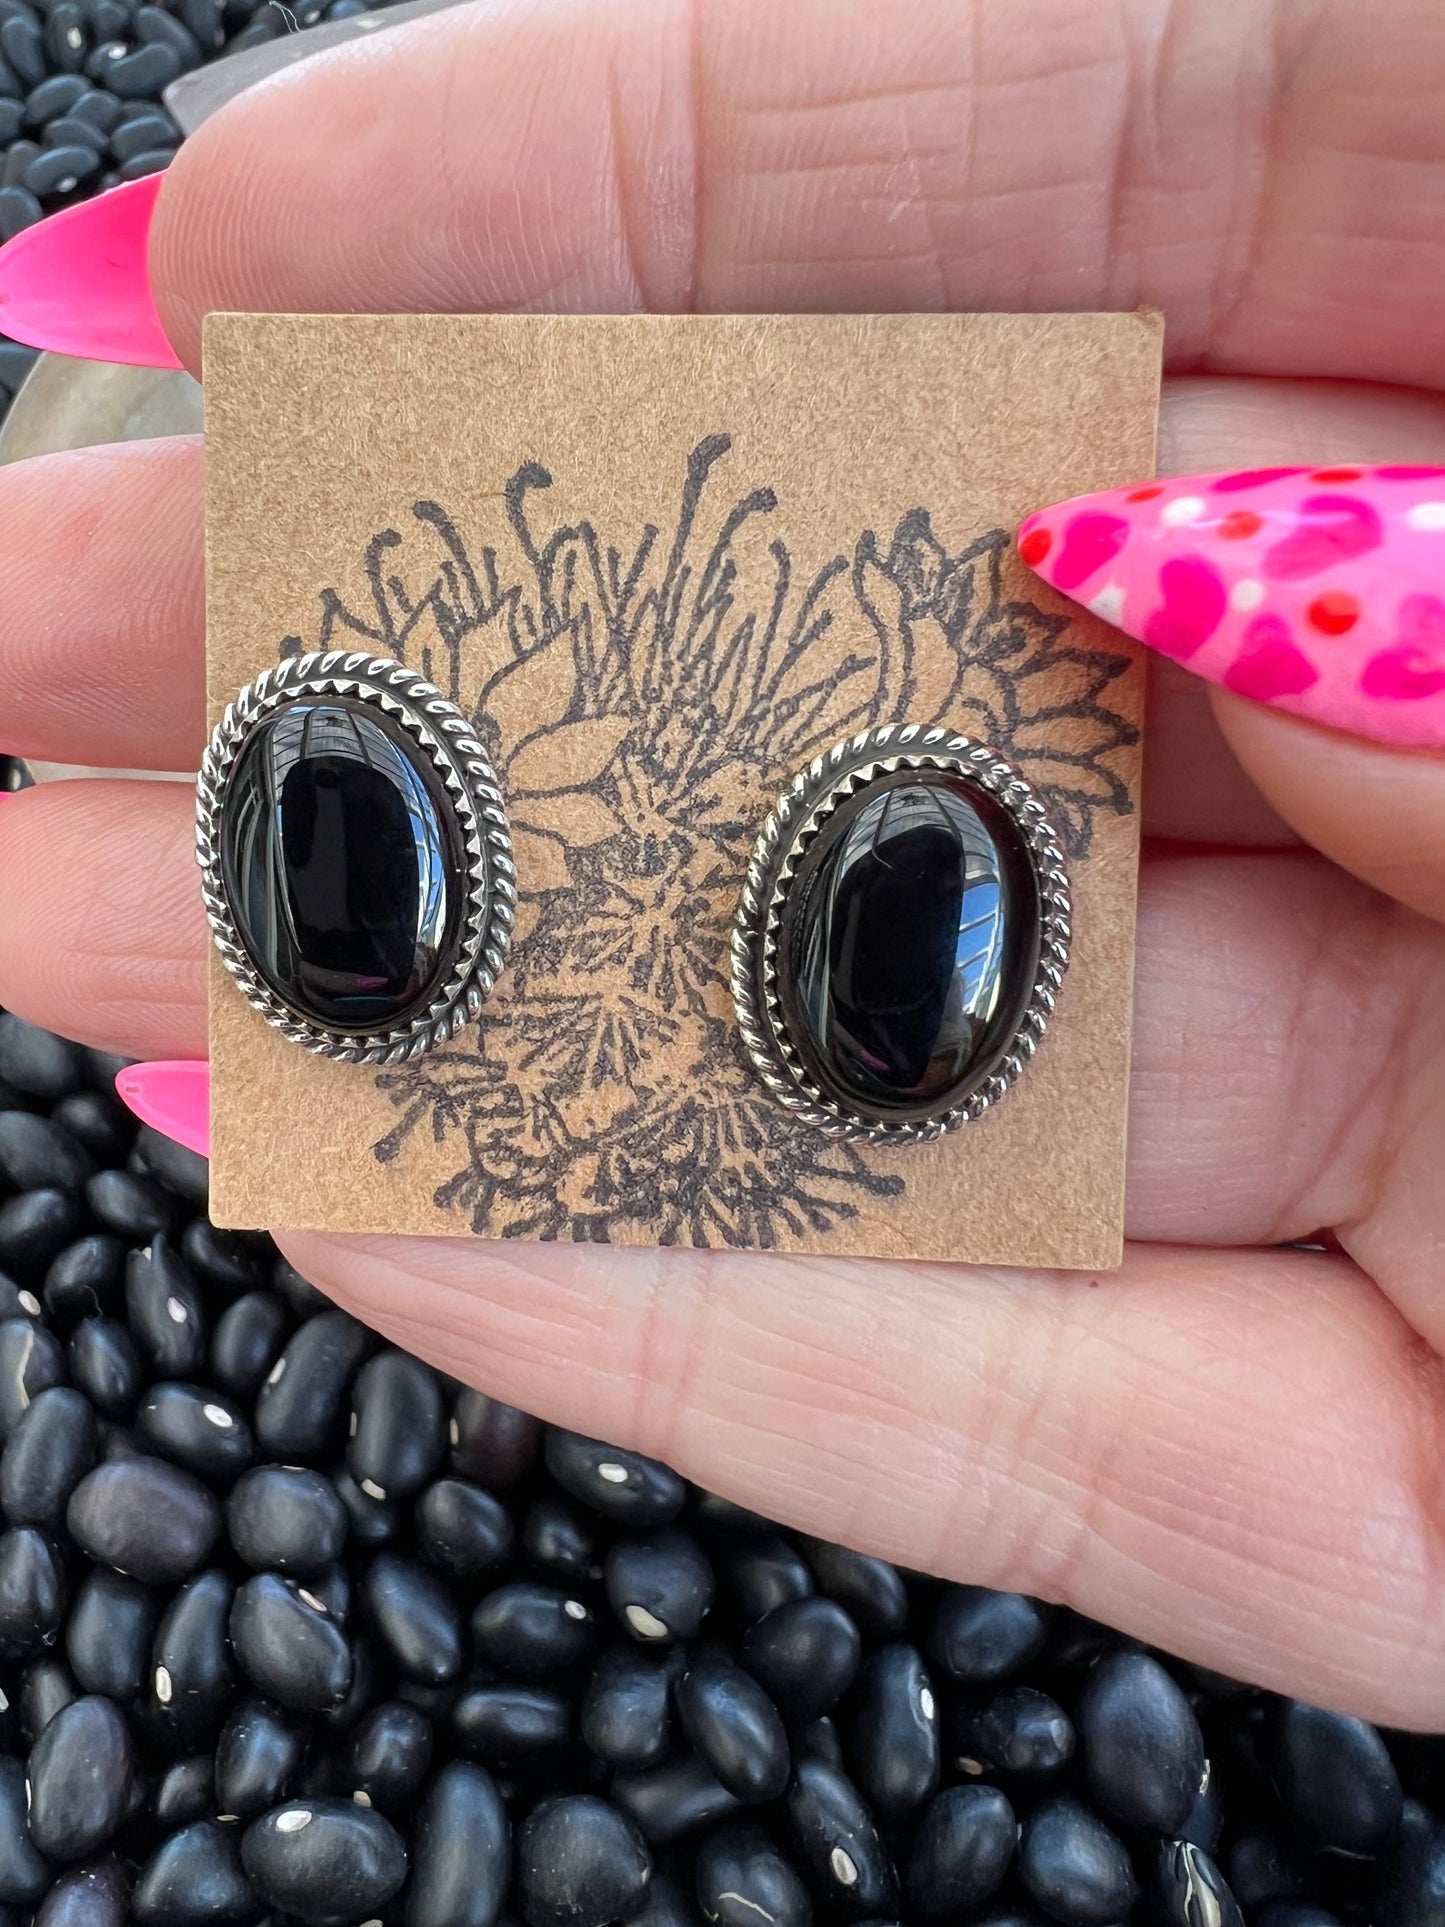 Black Onyx Studs with silver ball details